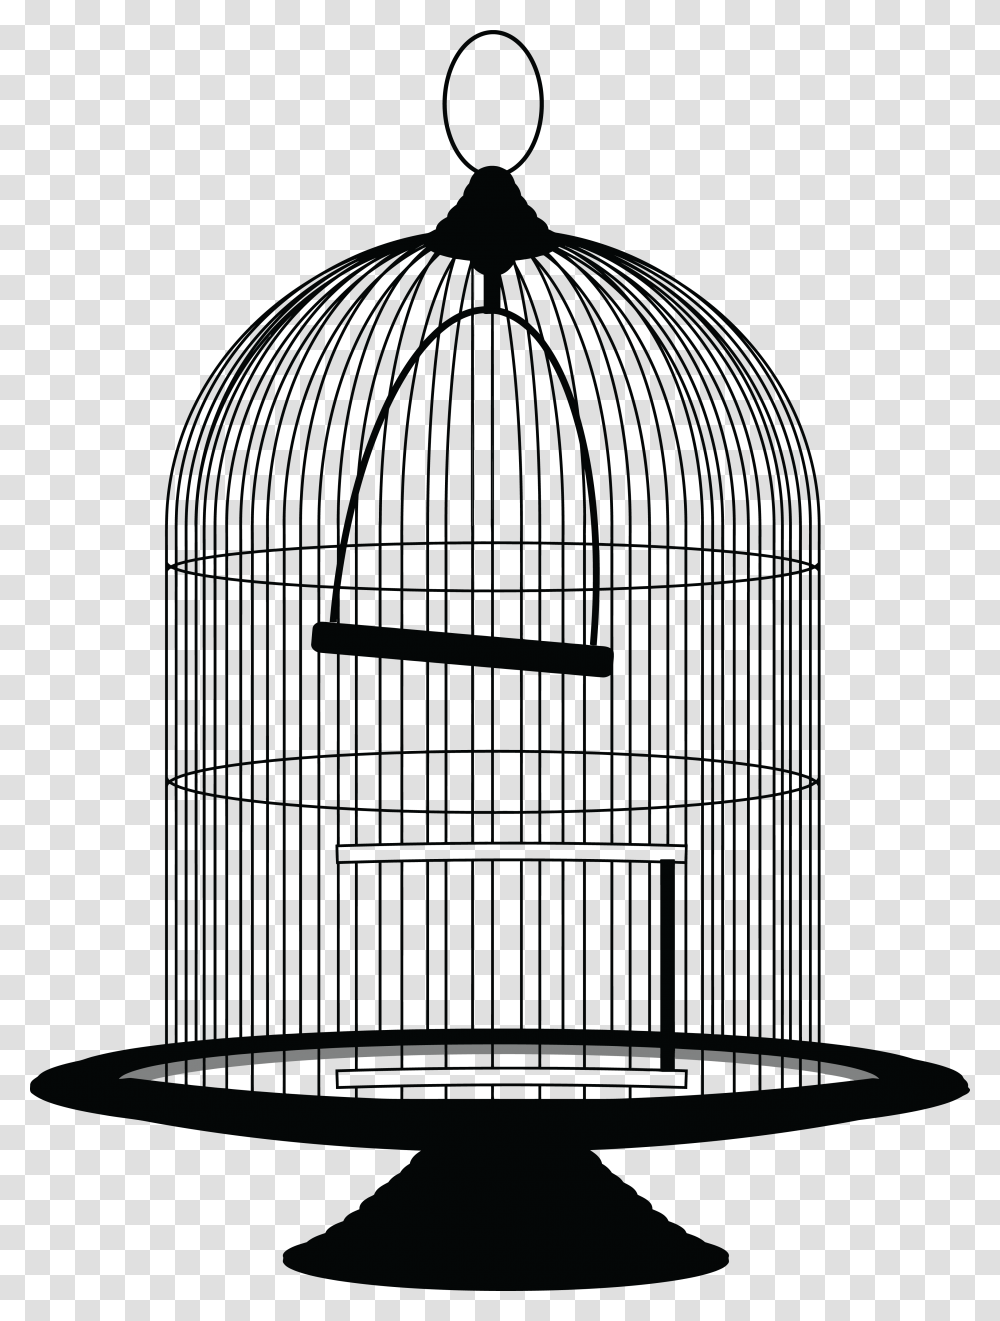 Collection Of Bird Cage Clipart Bird Cage Clipart, Lamp, Lighting, Bottle, Beverage Transparent Png